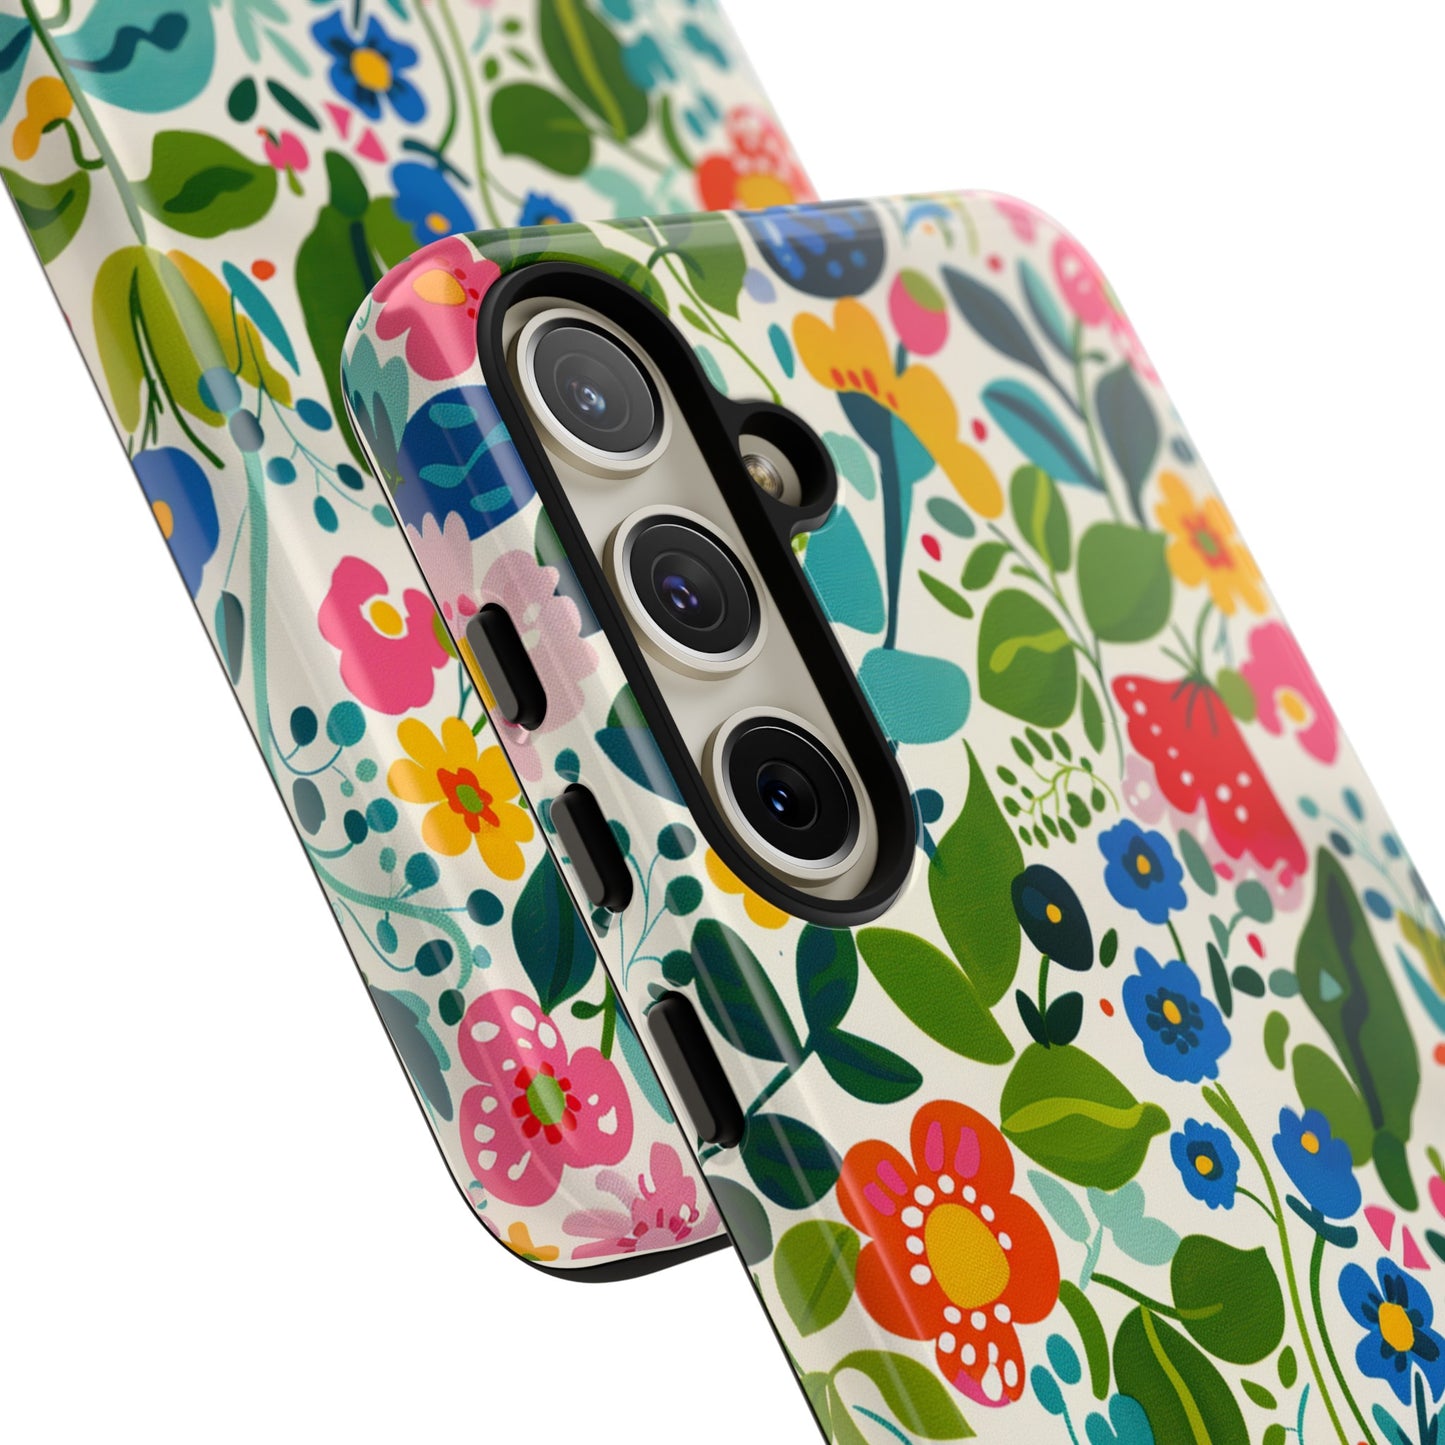 Spring Celebration in Flowers Tough Phone Cases